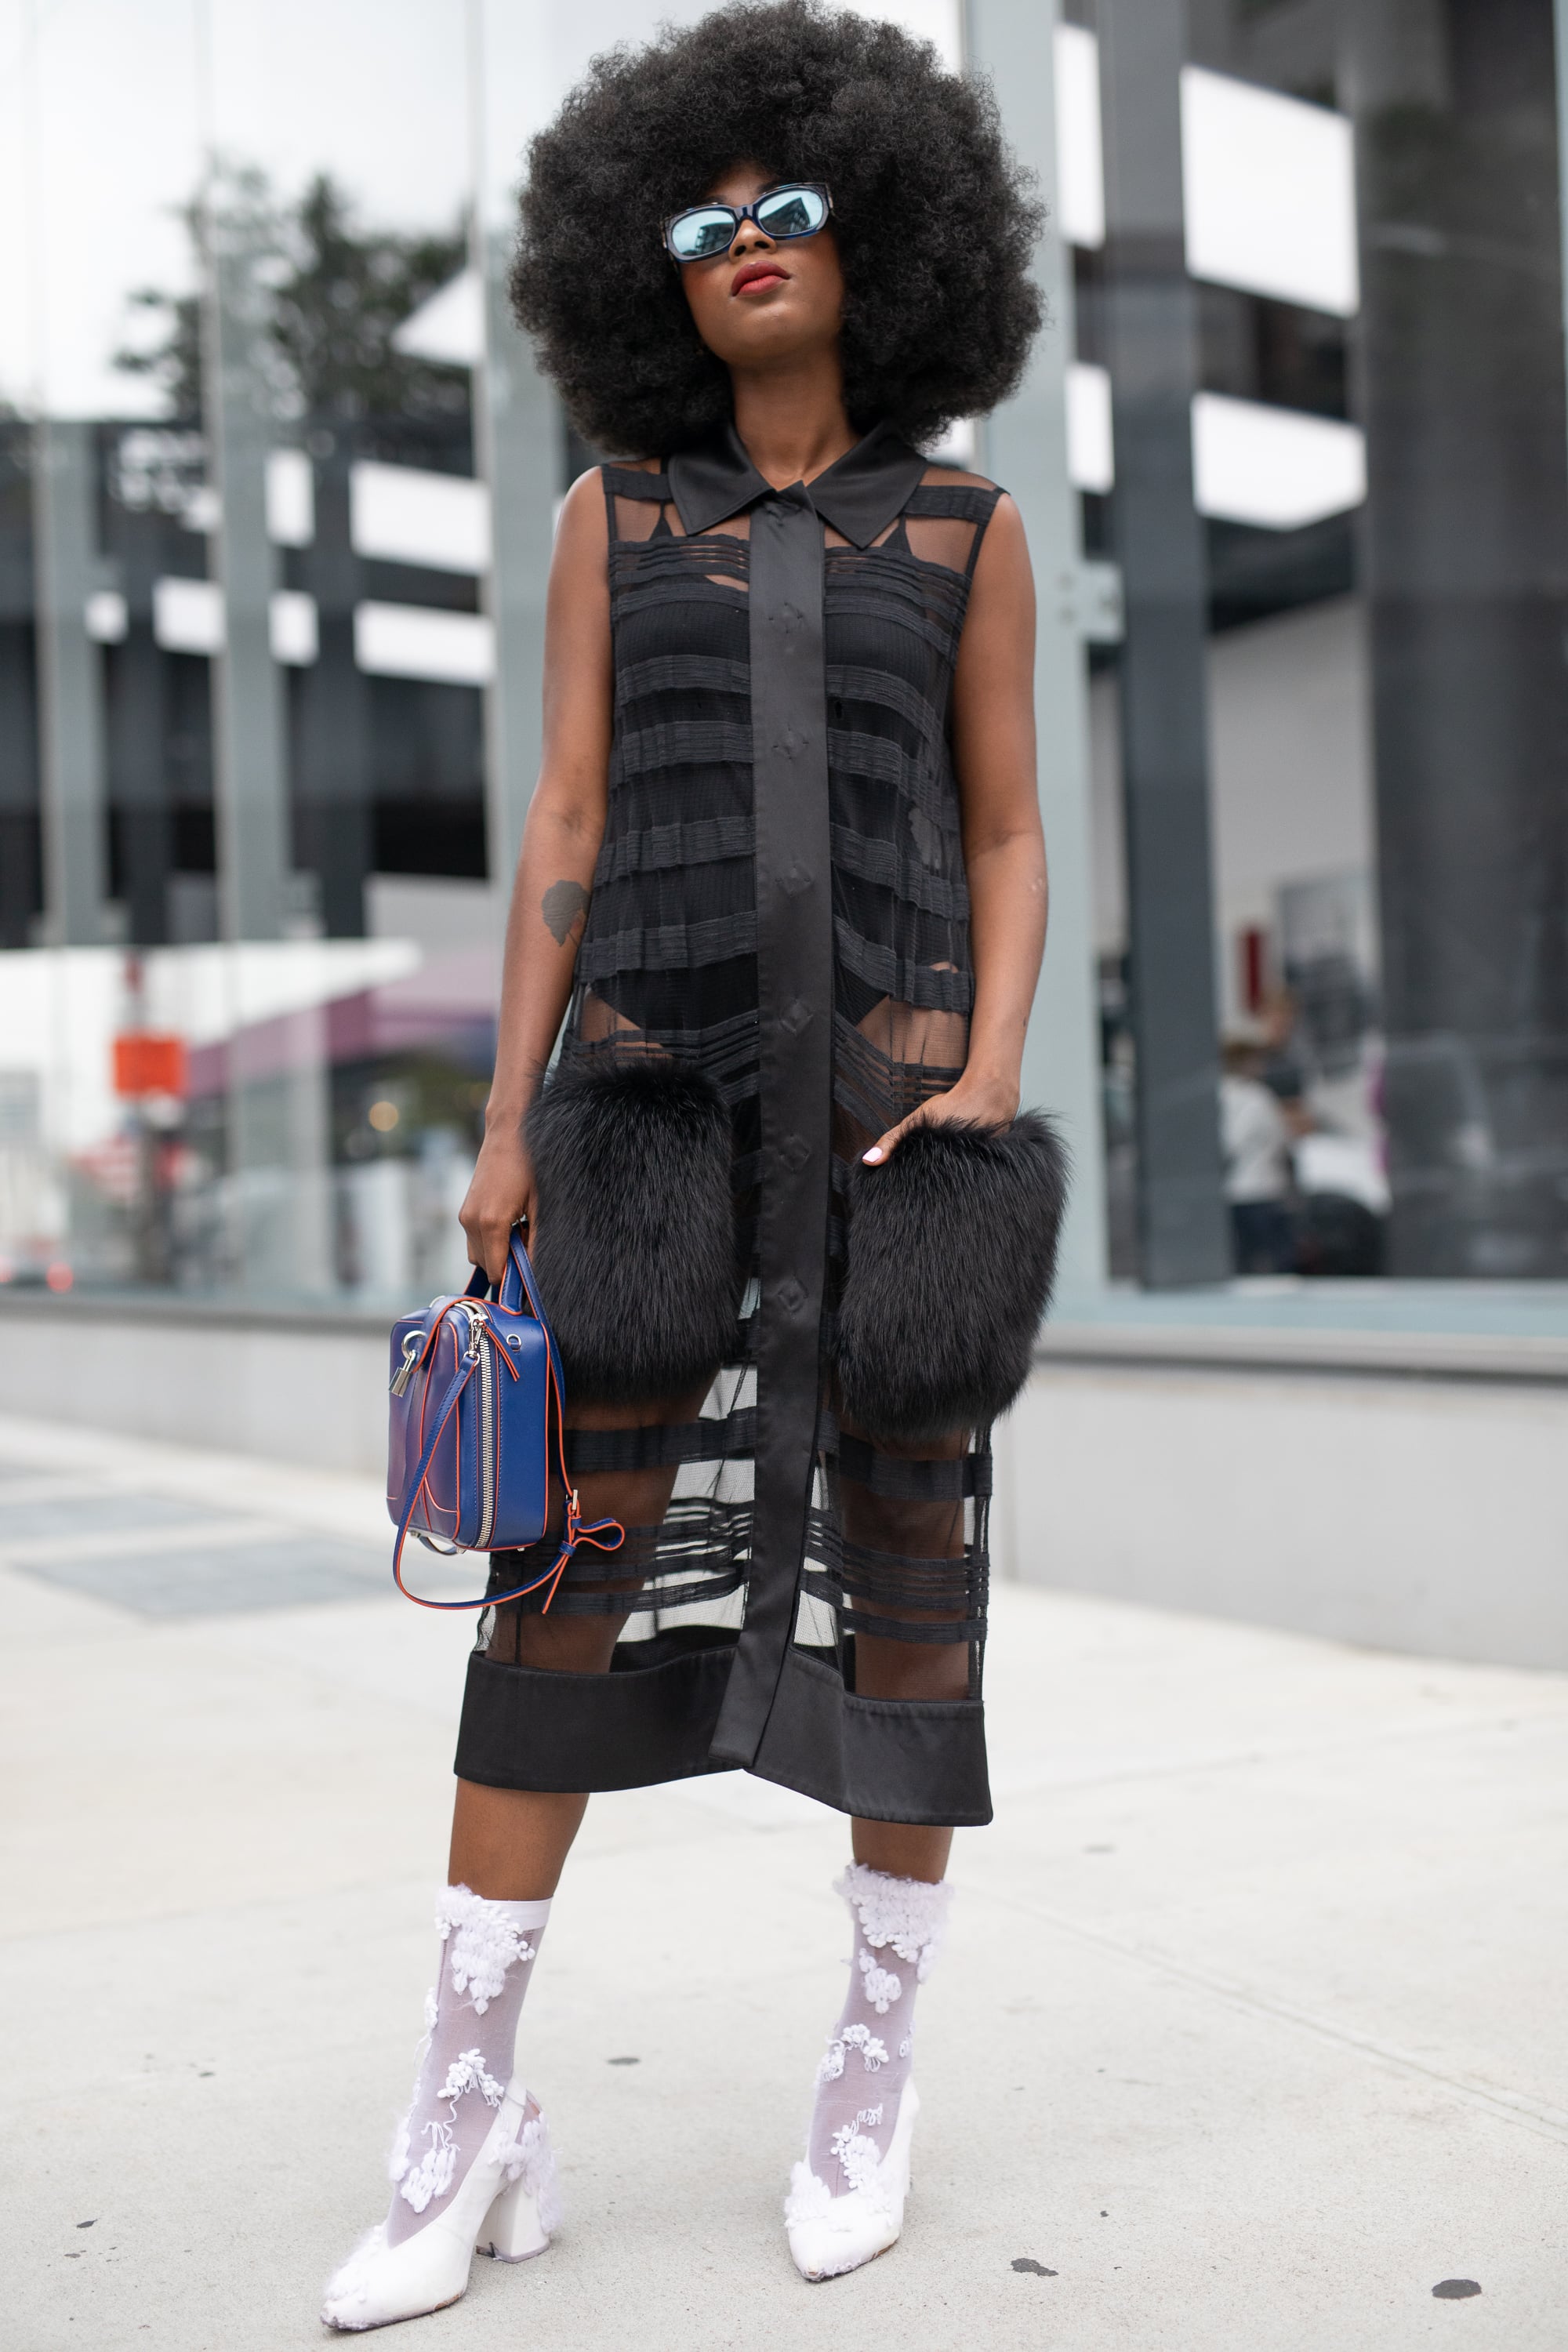 Styling a black sheer dress with a bodysuit., This Is by Far the Riskiest  Outfit We've Seen at Fashion Week